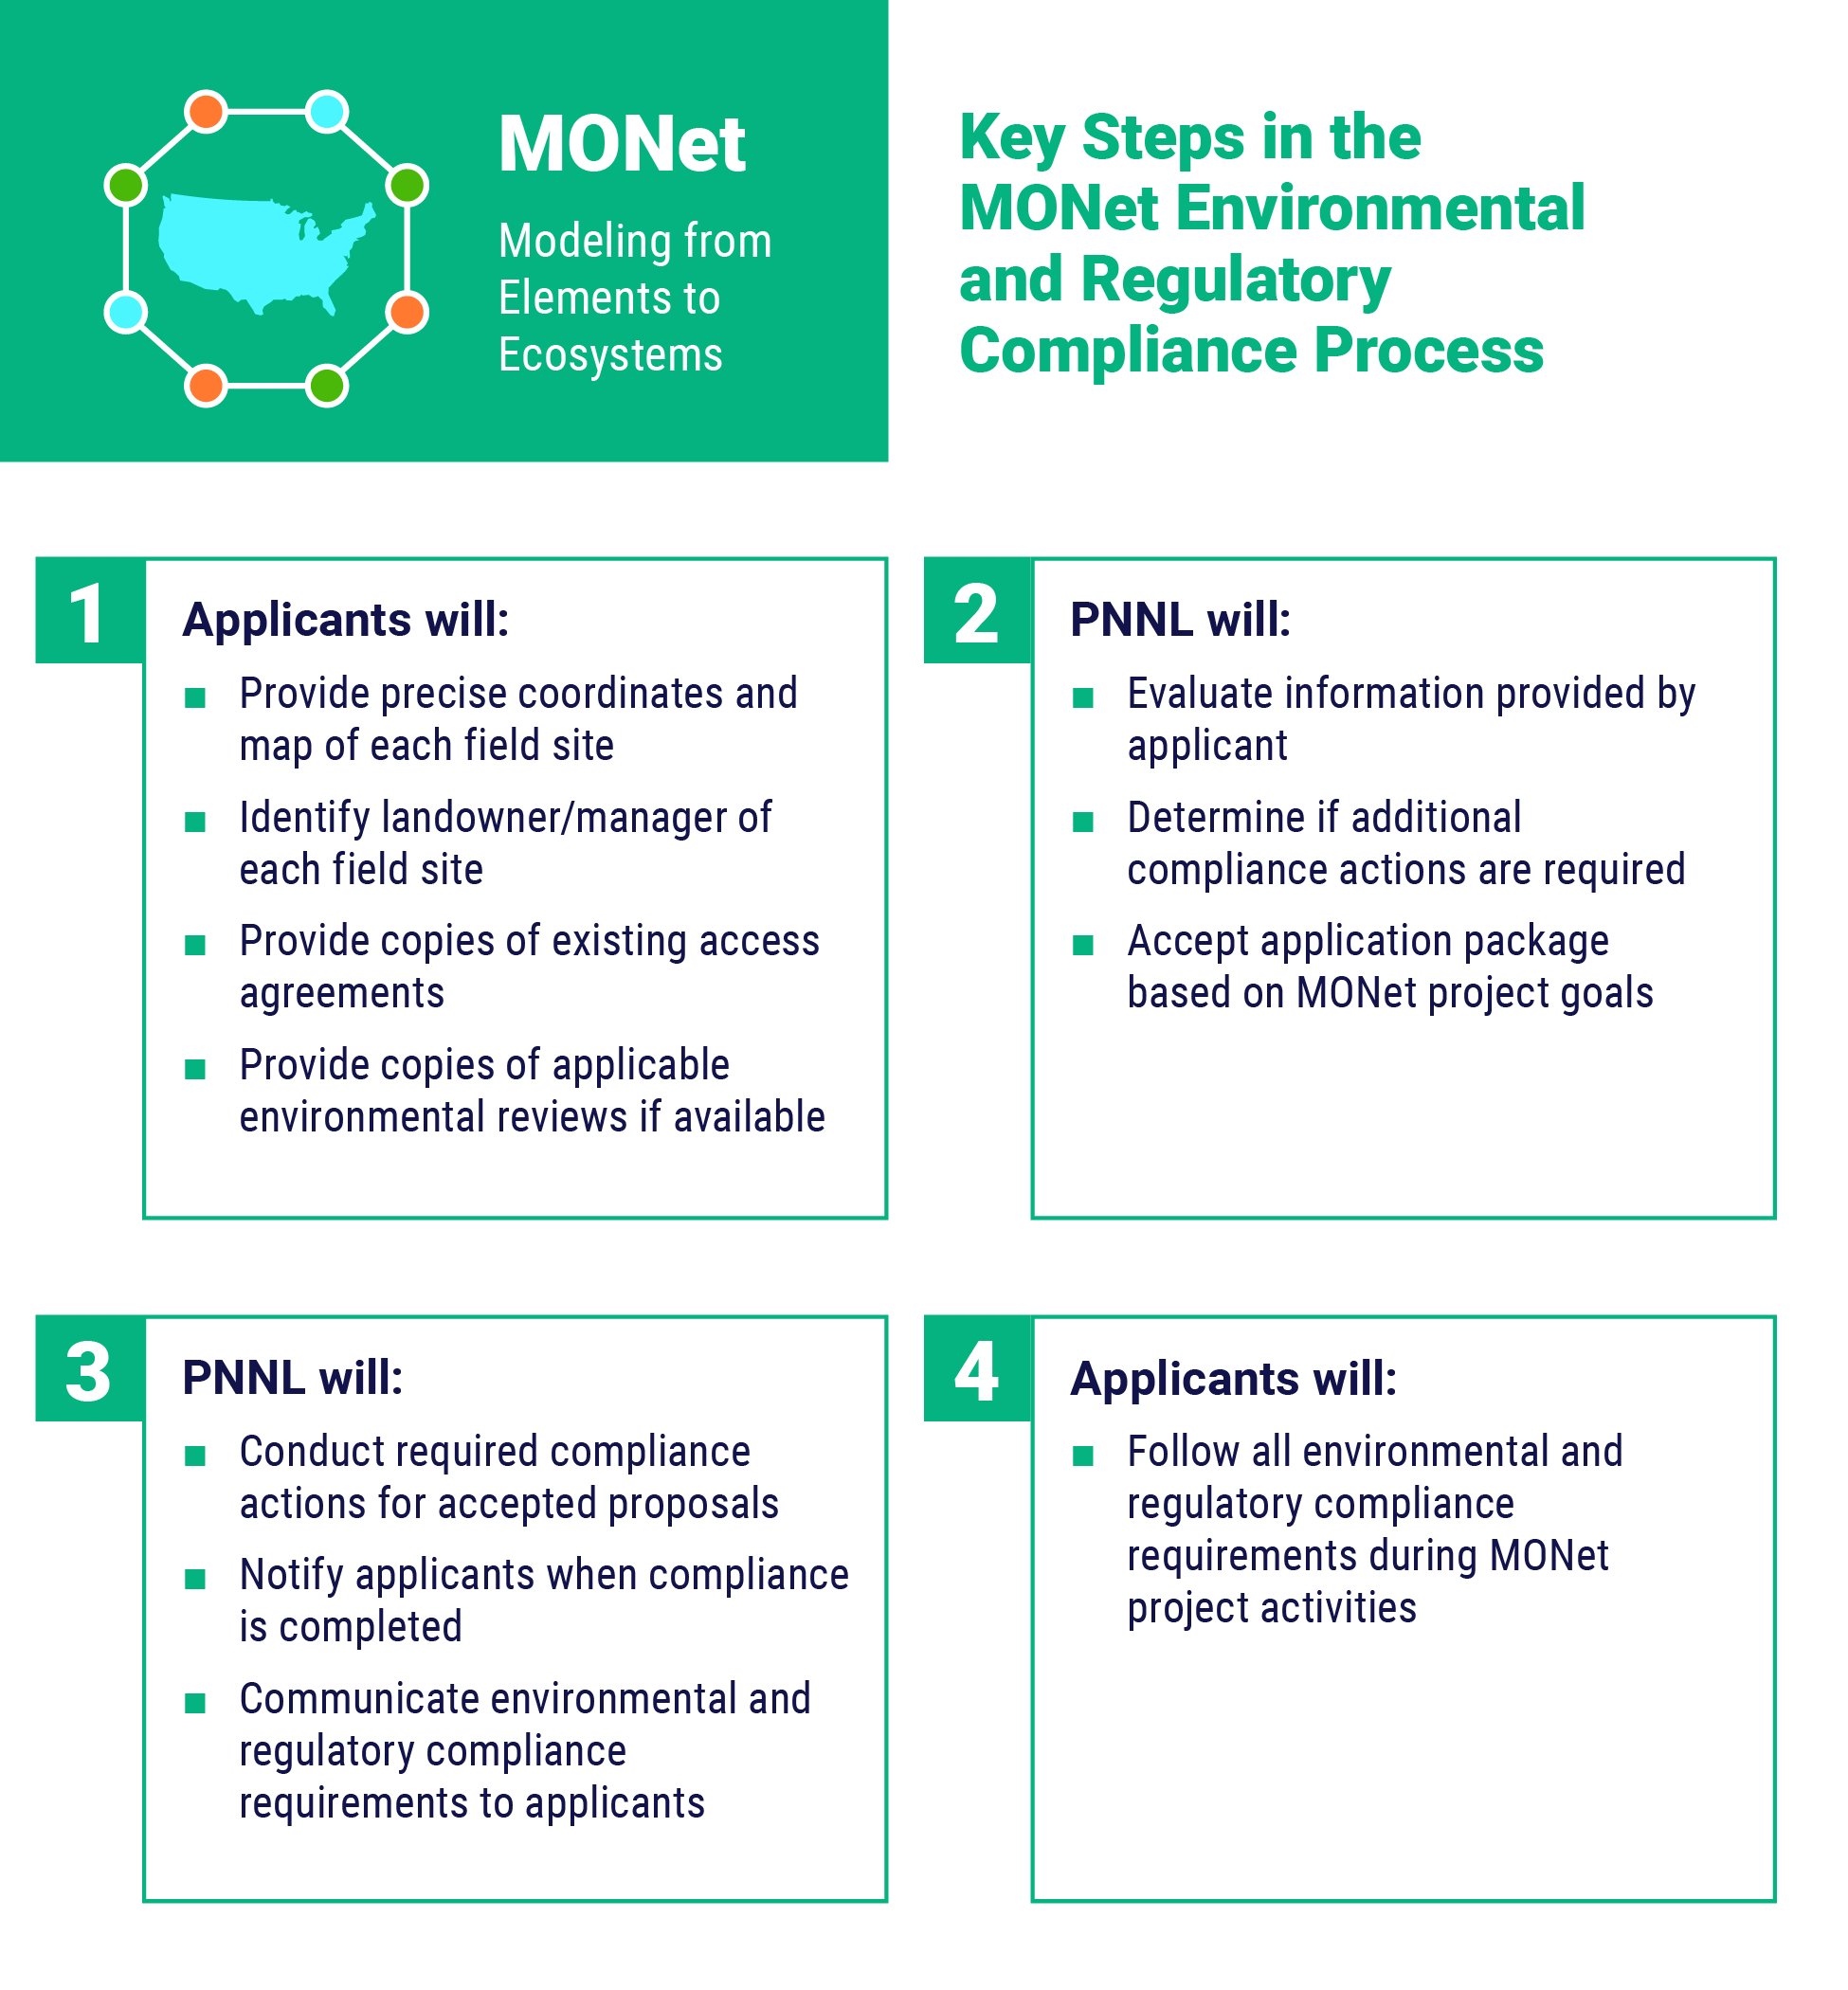 Key Steps in the MONet Environmental and Regulatory Compliance Process